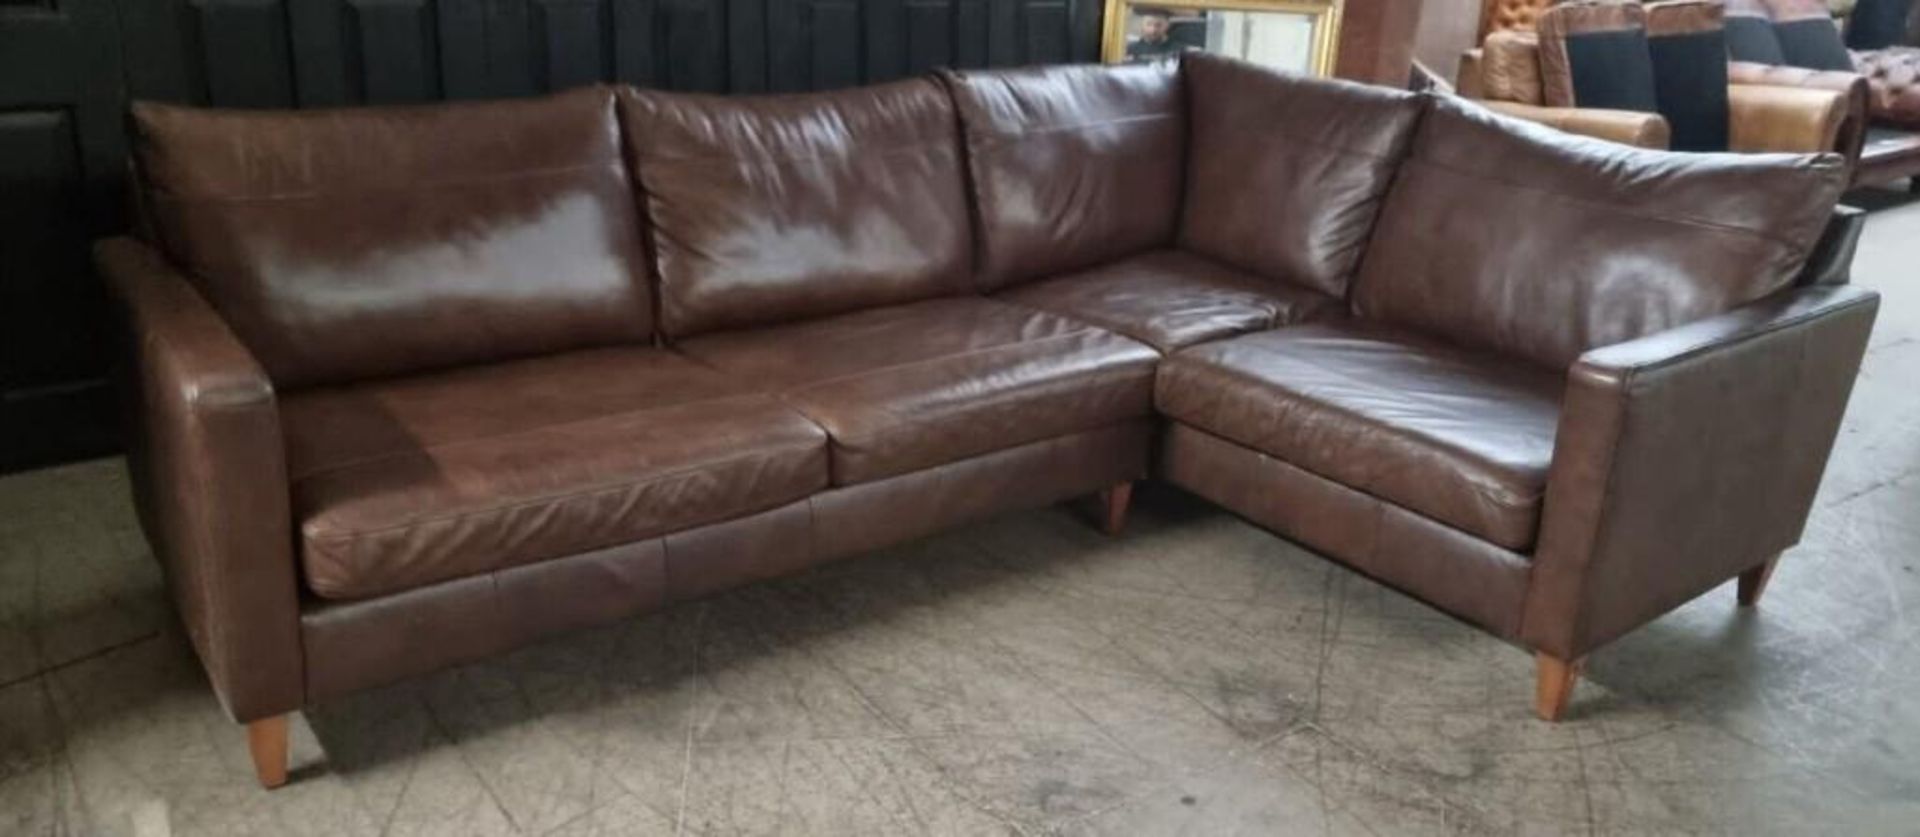 Brand New John Lewis 100% leather Bailey corner sofa in Chestnut Brown - Image 4 of 4